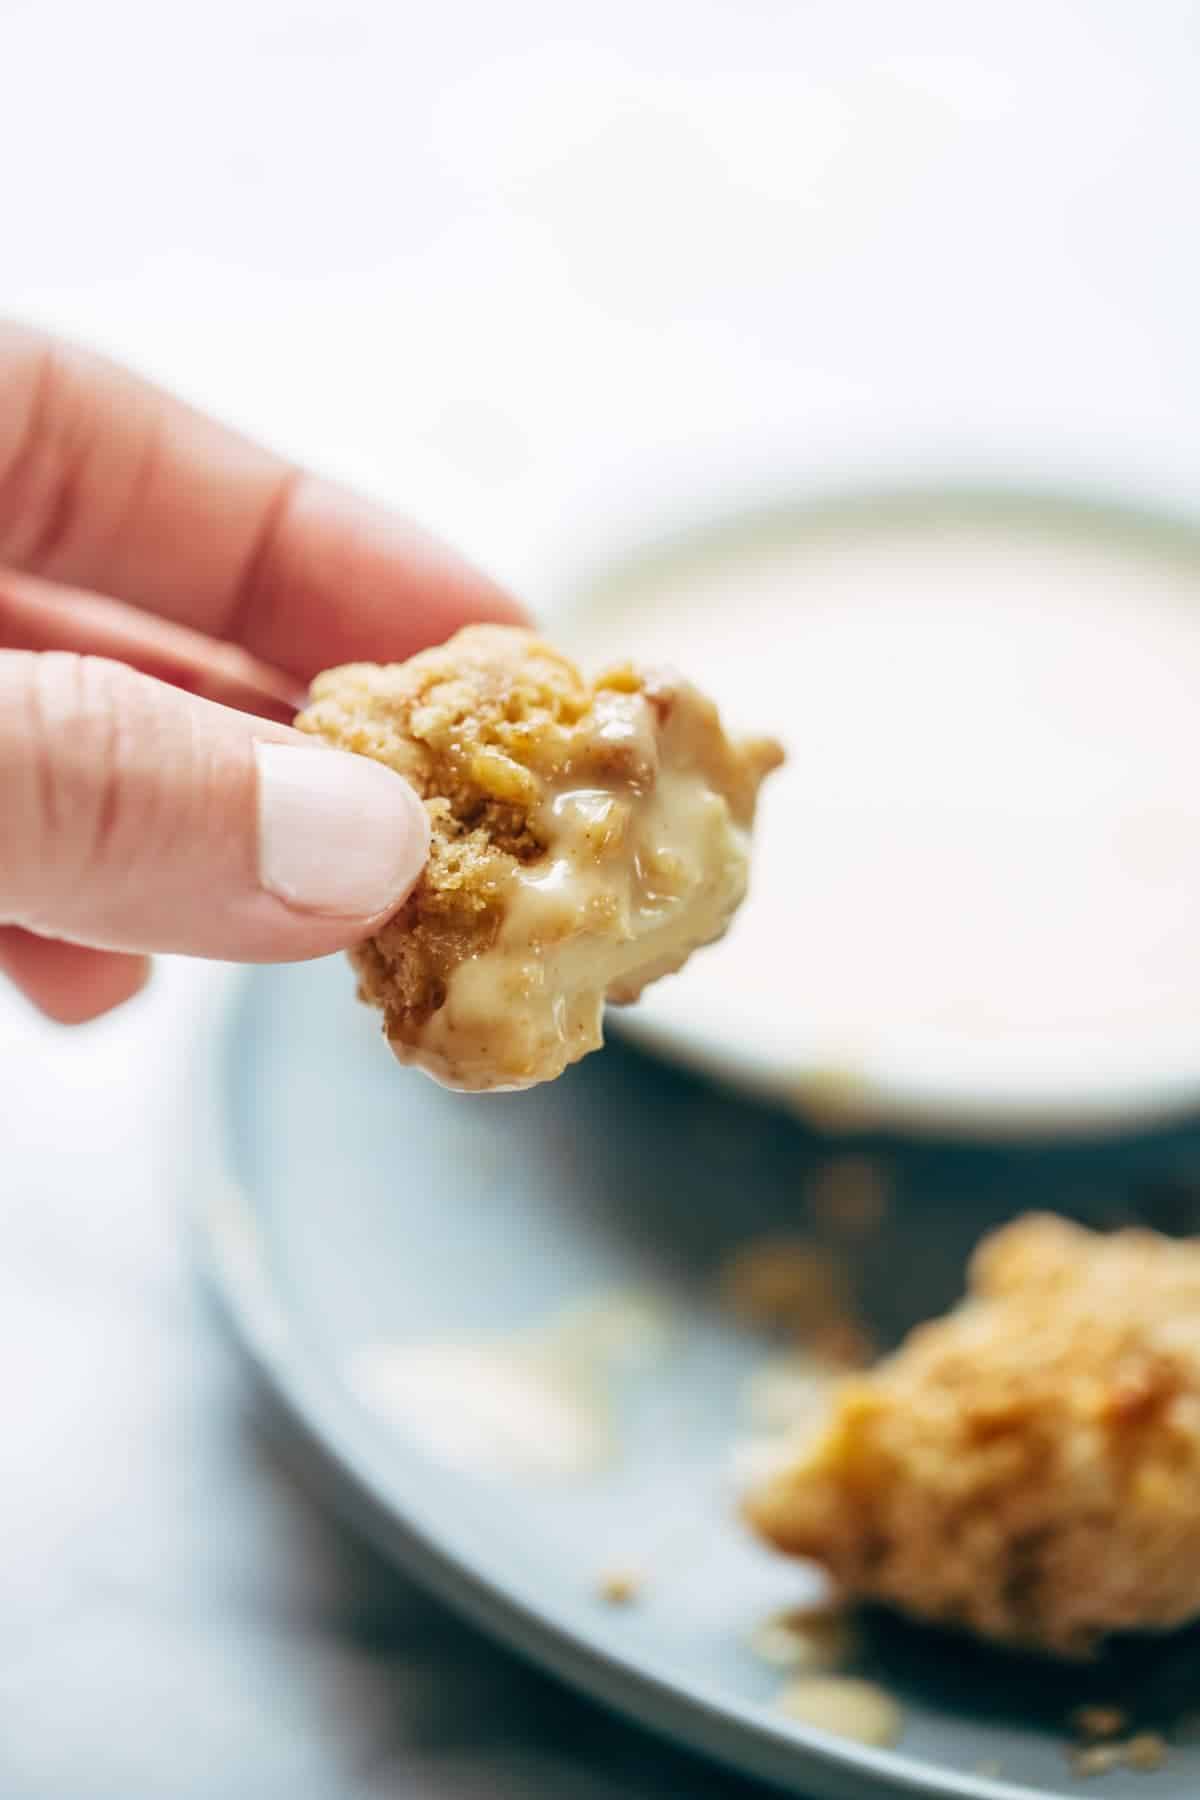 Everyone LOVES these! Baked popcorn chicken that tastes fried! Easy recipe, ready in 30 minutes. SO yummy and fun to share! | pinchofyum.com